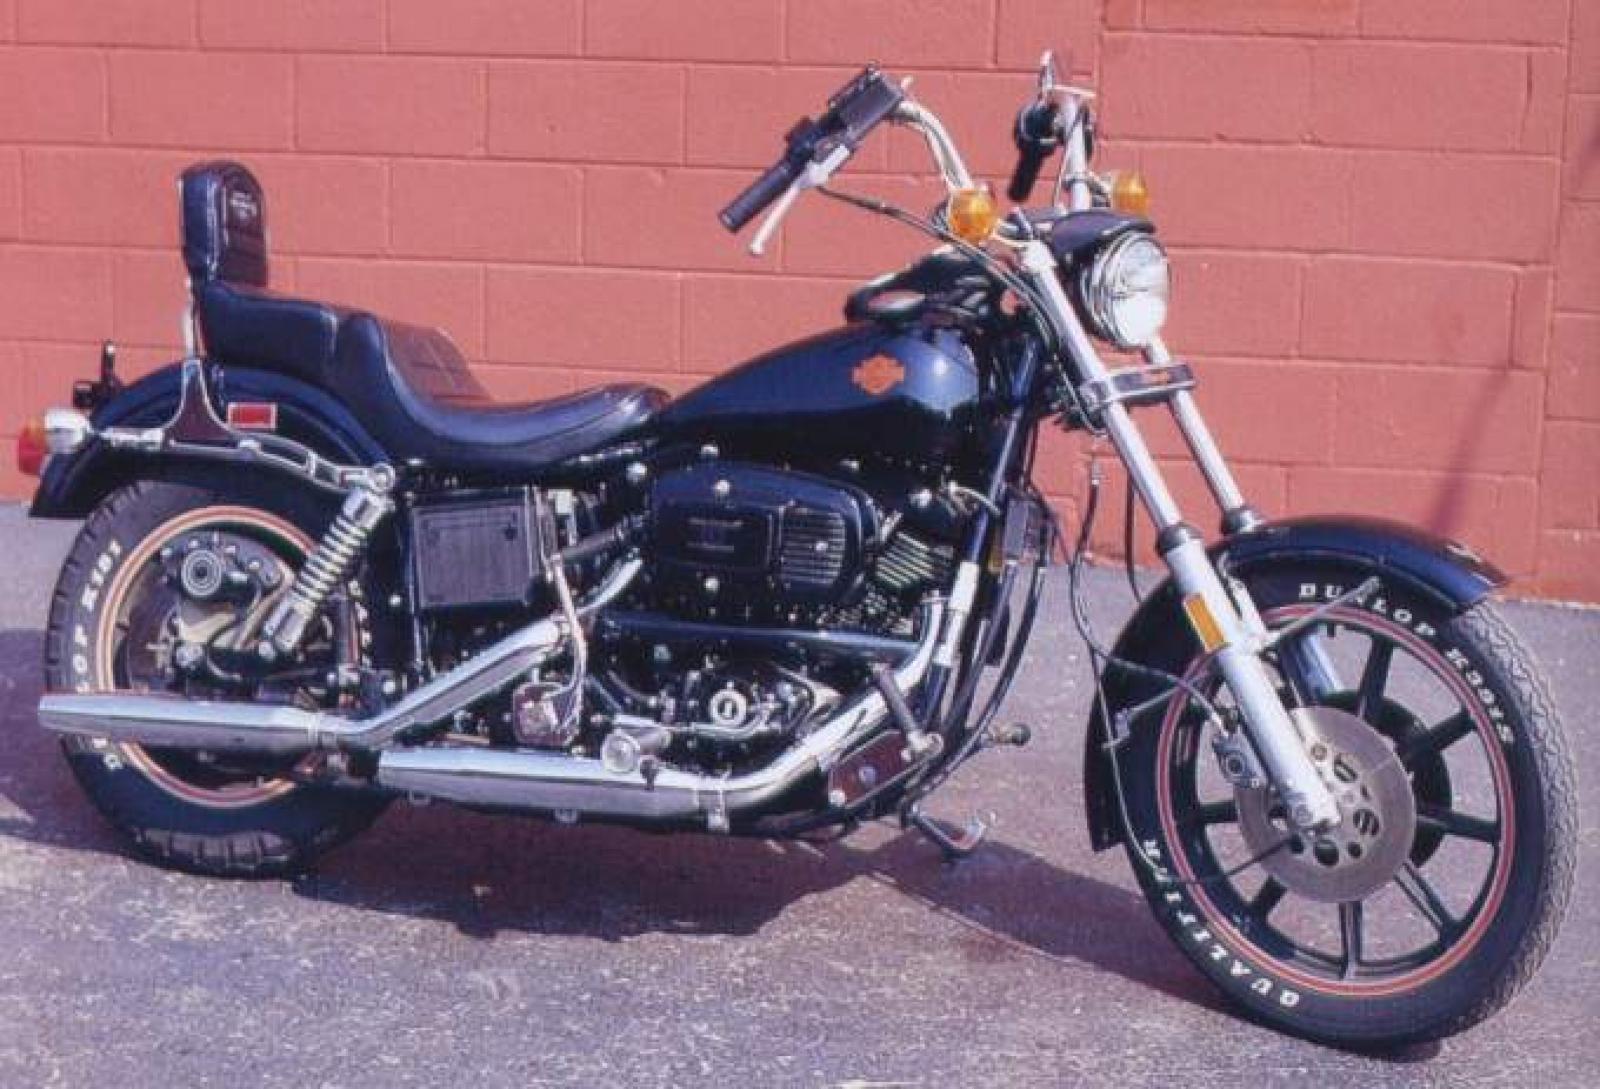 1982 Harley-Davidson FLHC 1340 EIectra Glide Classic (with sidecar) #7